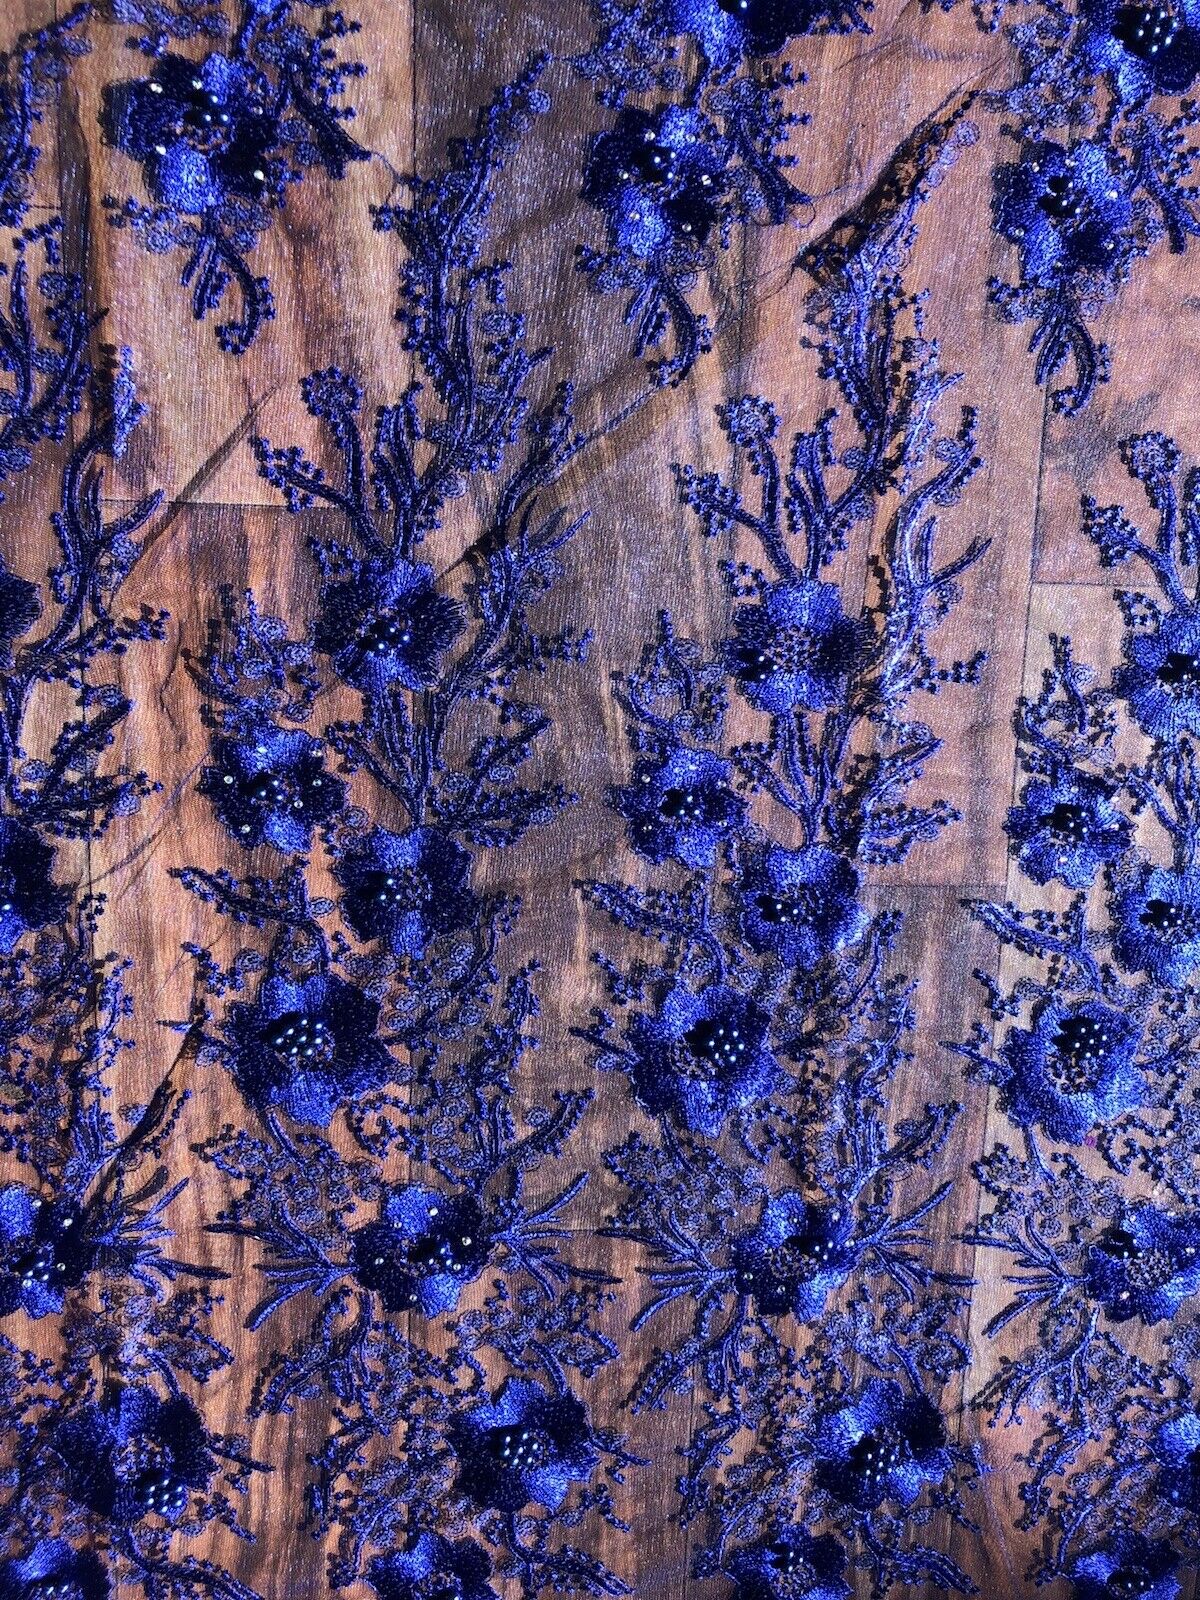 Embroidered Deep Blue Floral Lace Fabric with Pearls and Rhinestones